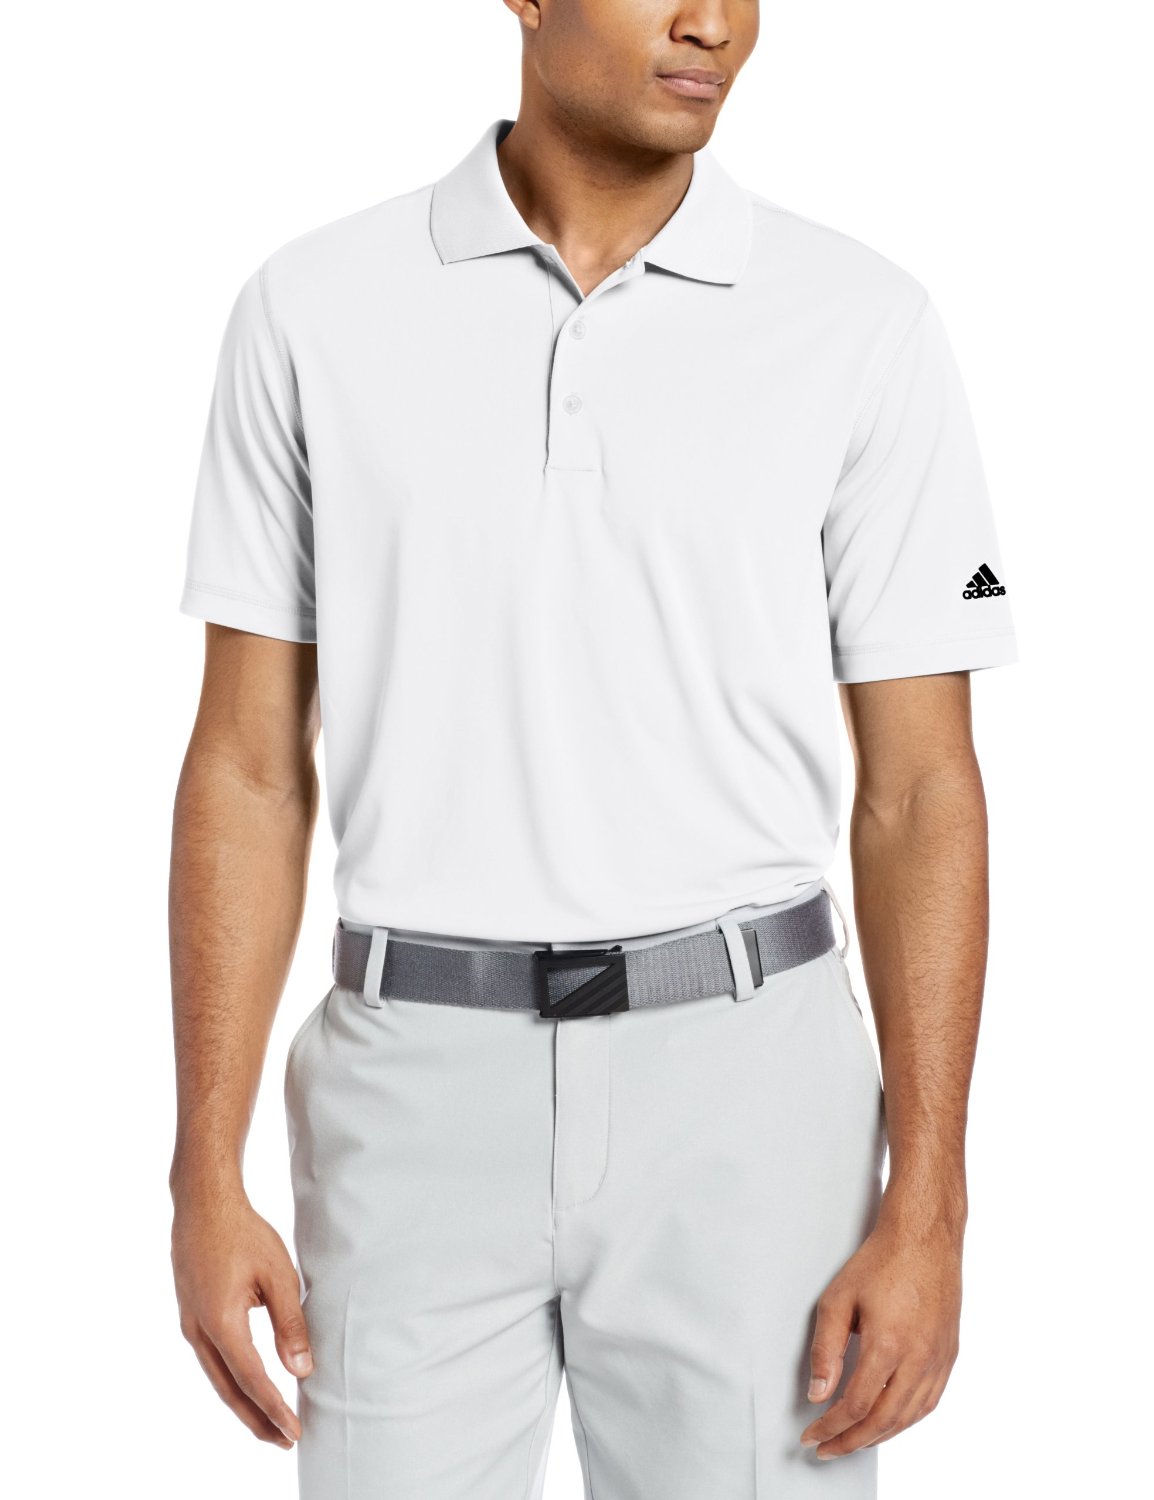 Mens Adidas Puremotion Solid Jersey Golf Polo Shirts